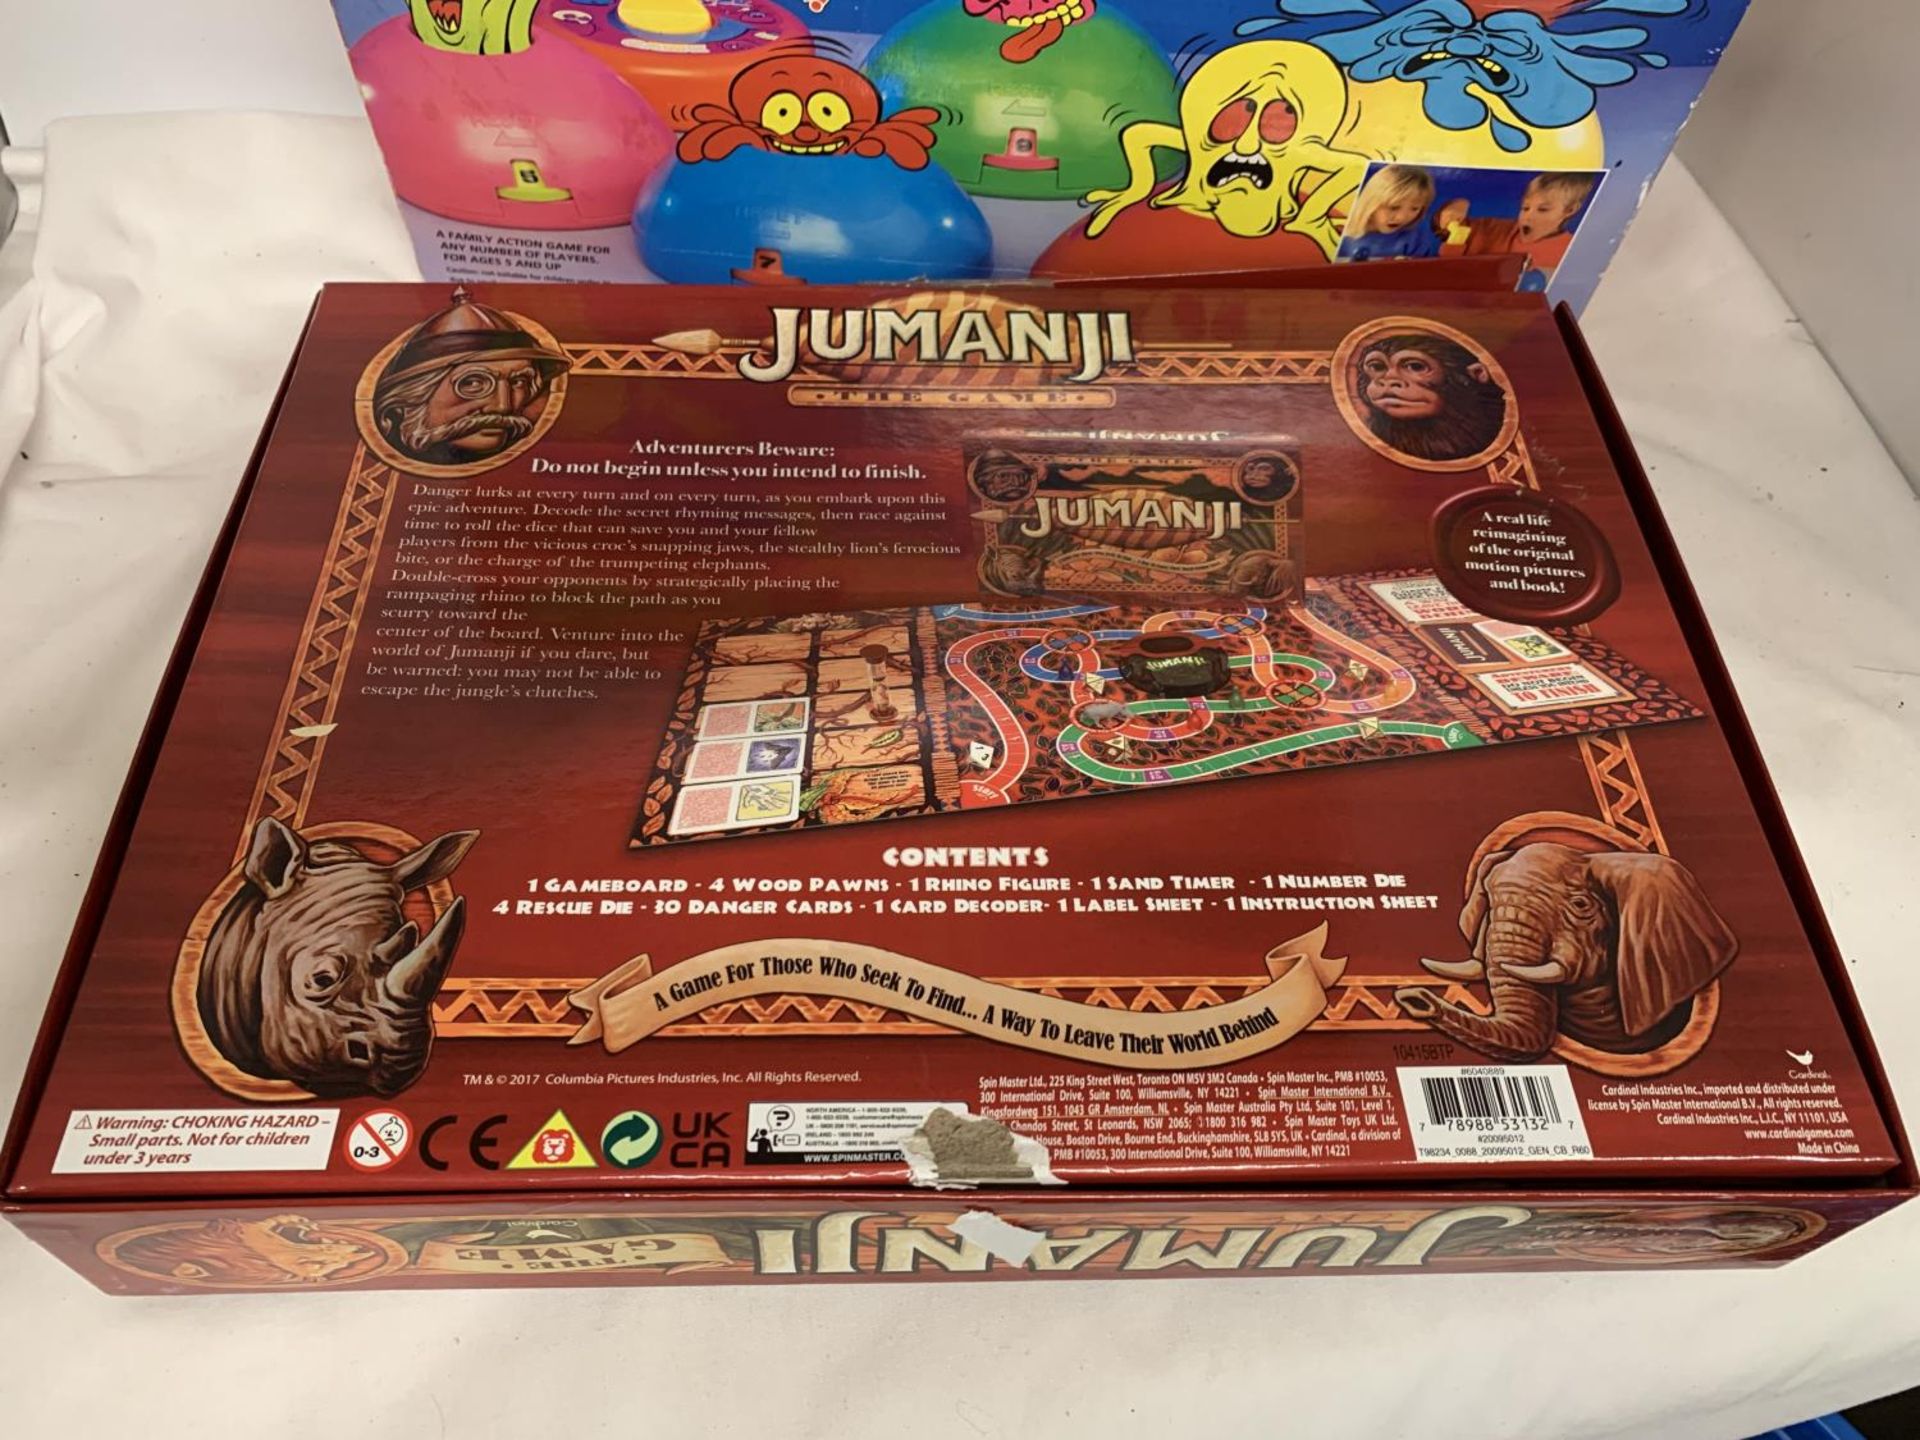 A JUMANJI GAME TOGETHER WITH A FURTHER GAME WHACK ATTACK - Image 2 of 2